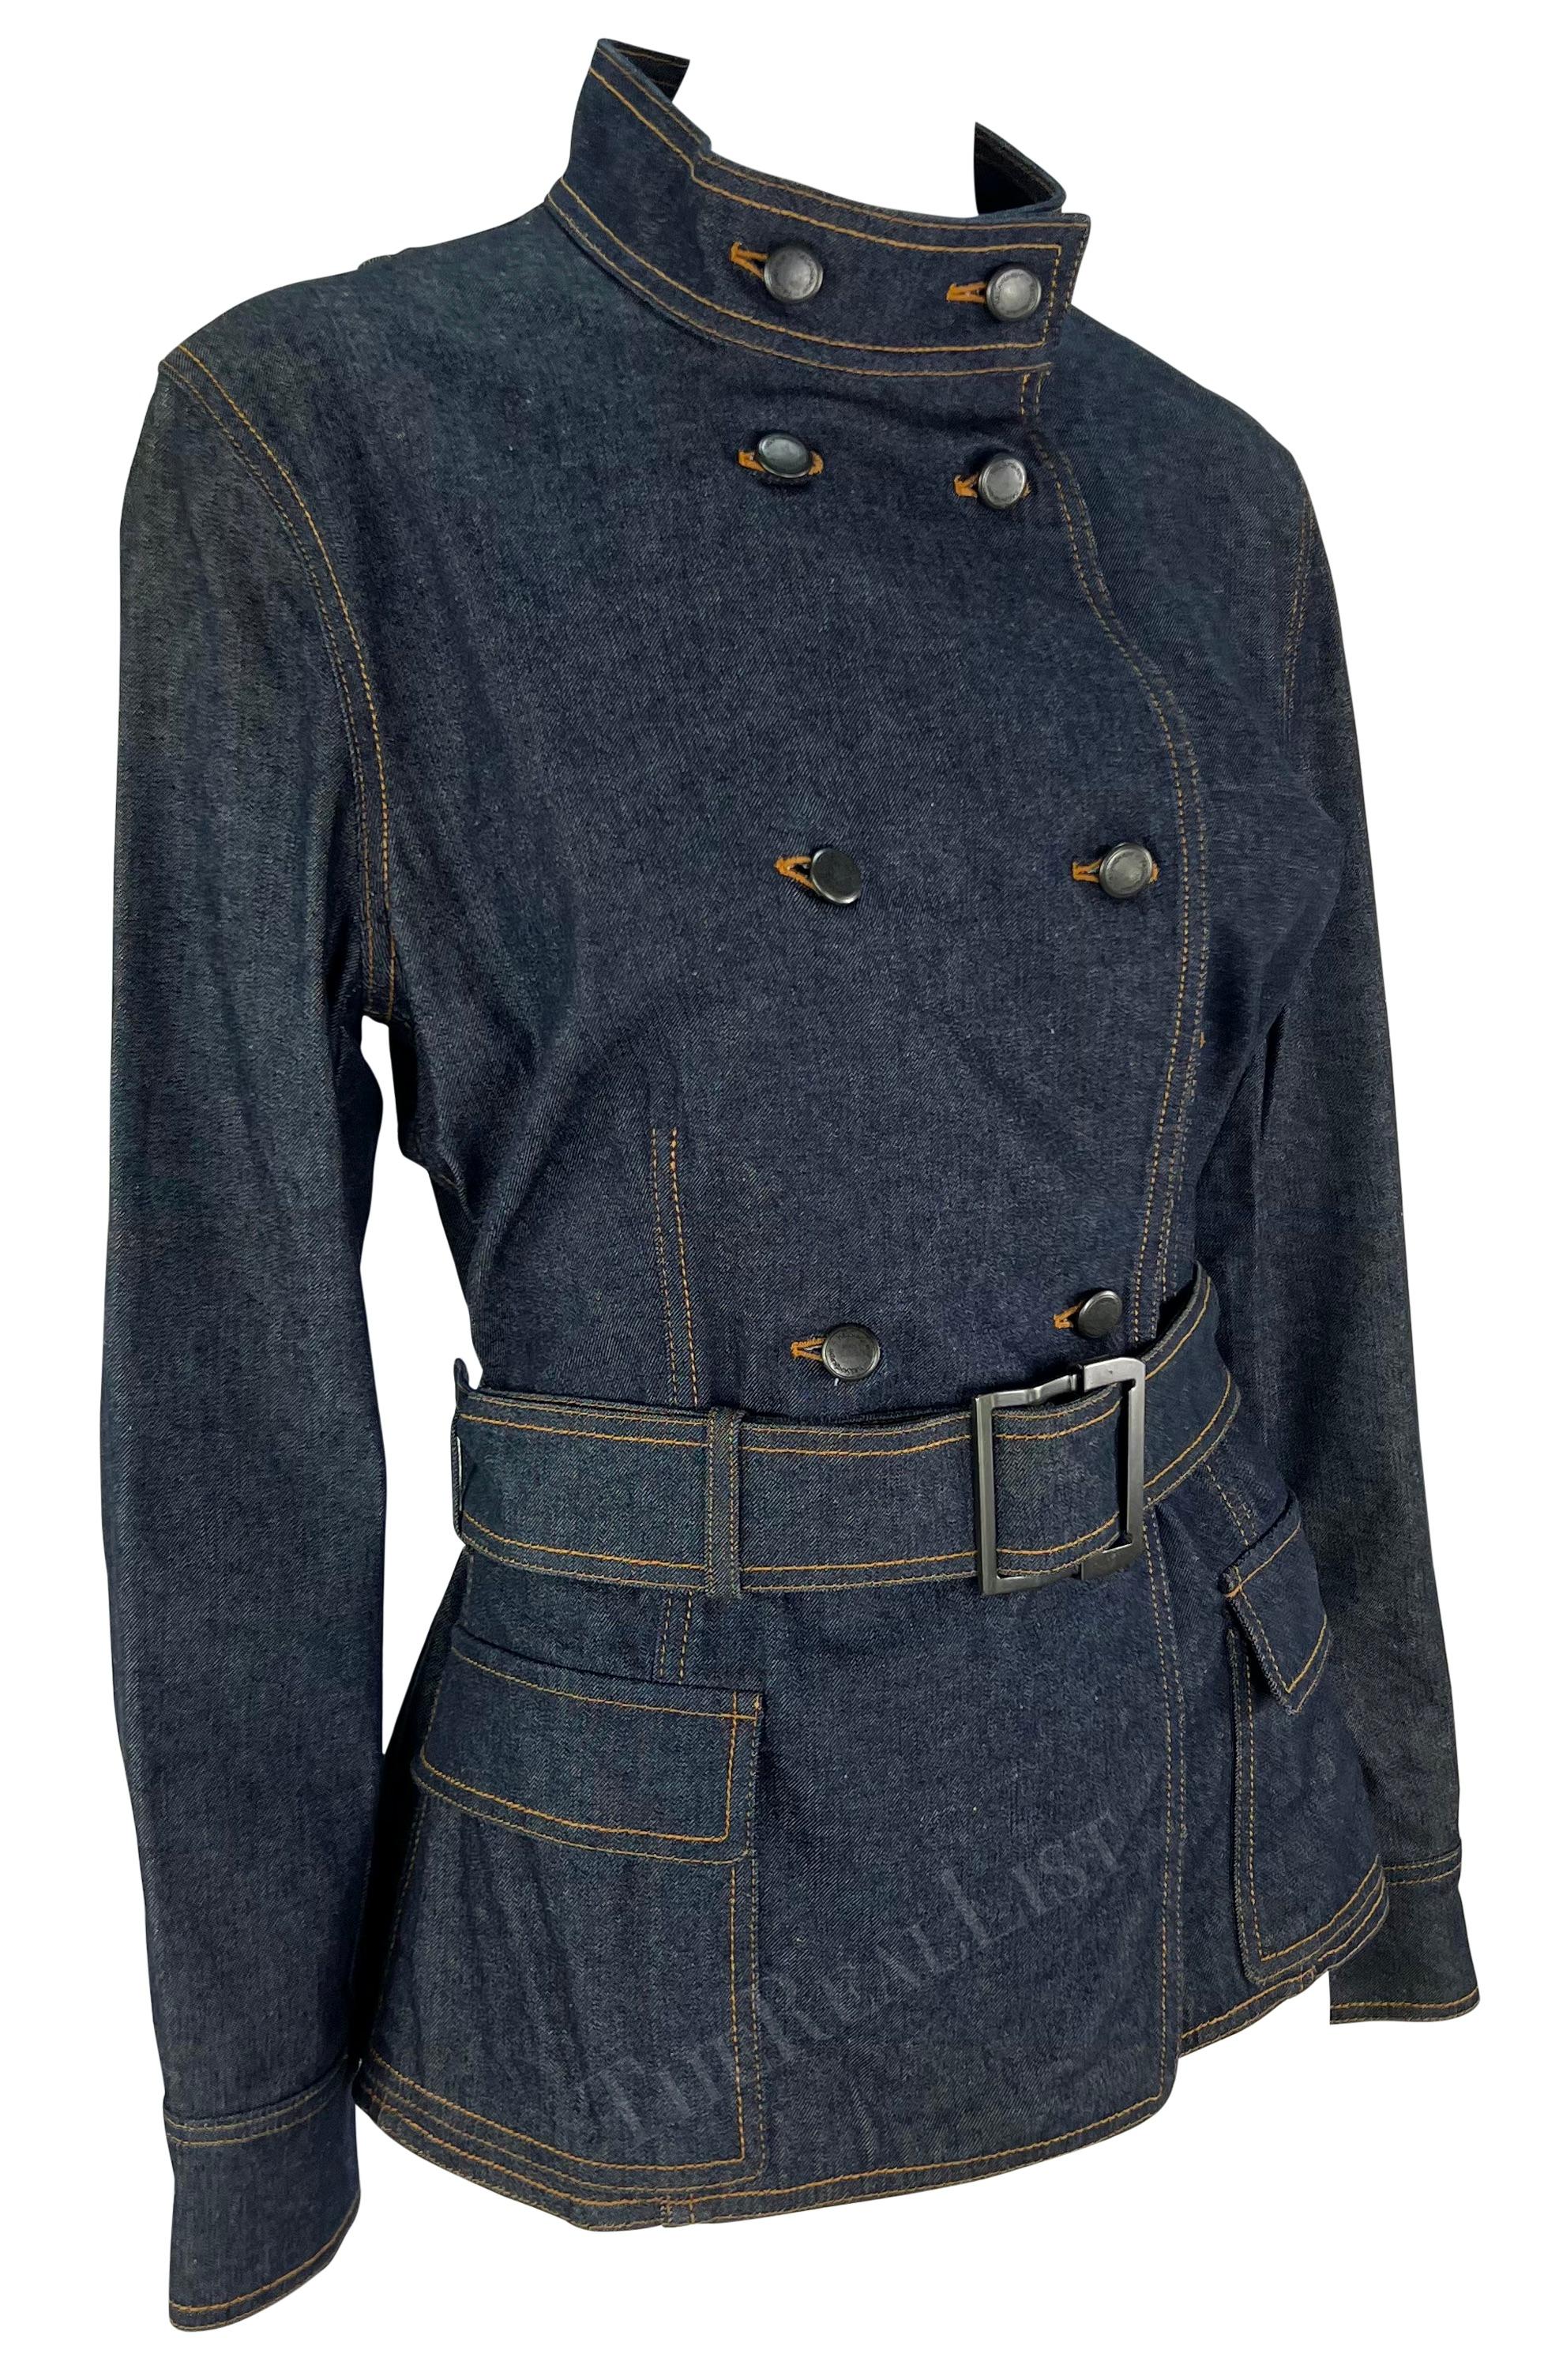 Early 2000s Yves Saint Laurent by Tom Ford Belted Denim Jacket For Sale 2